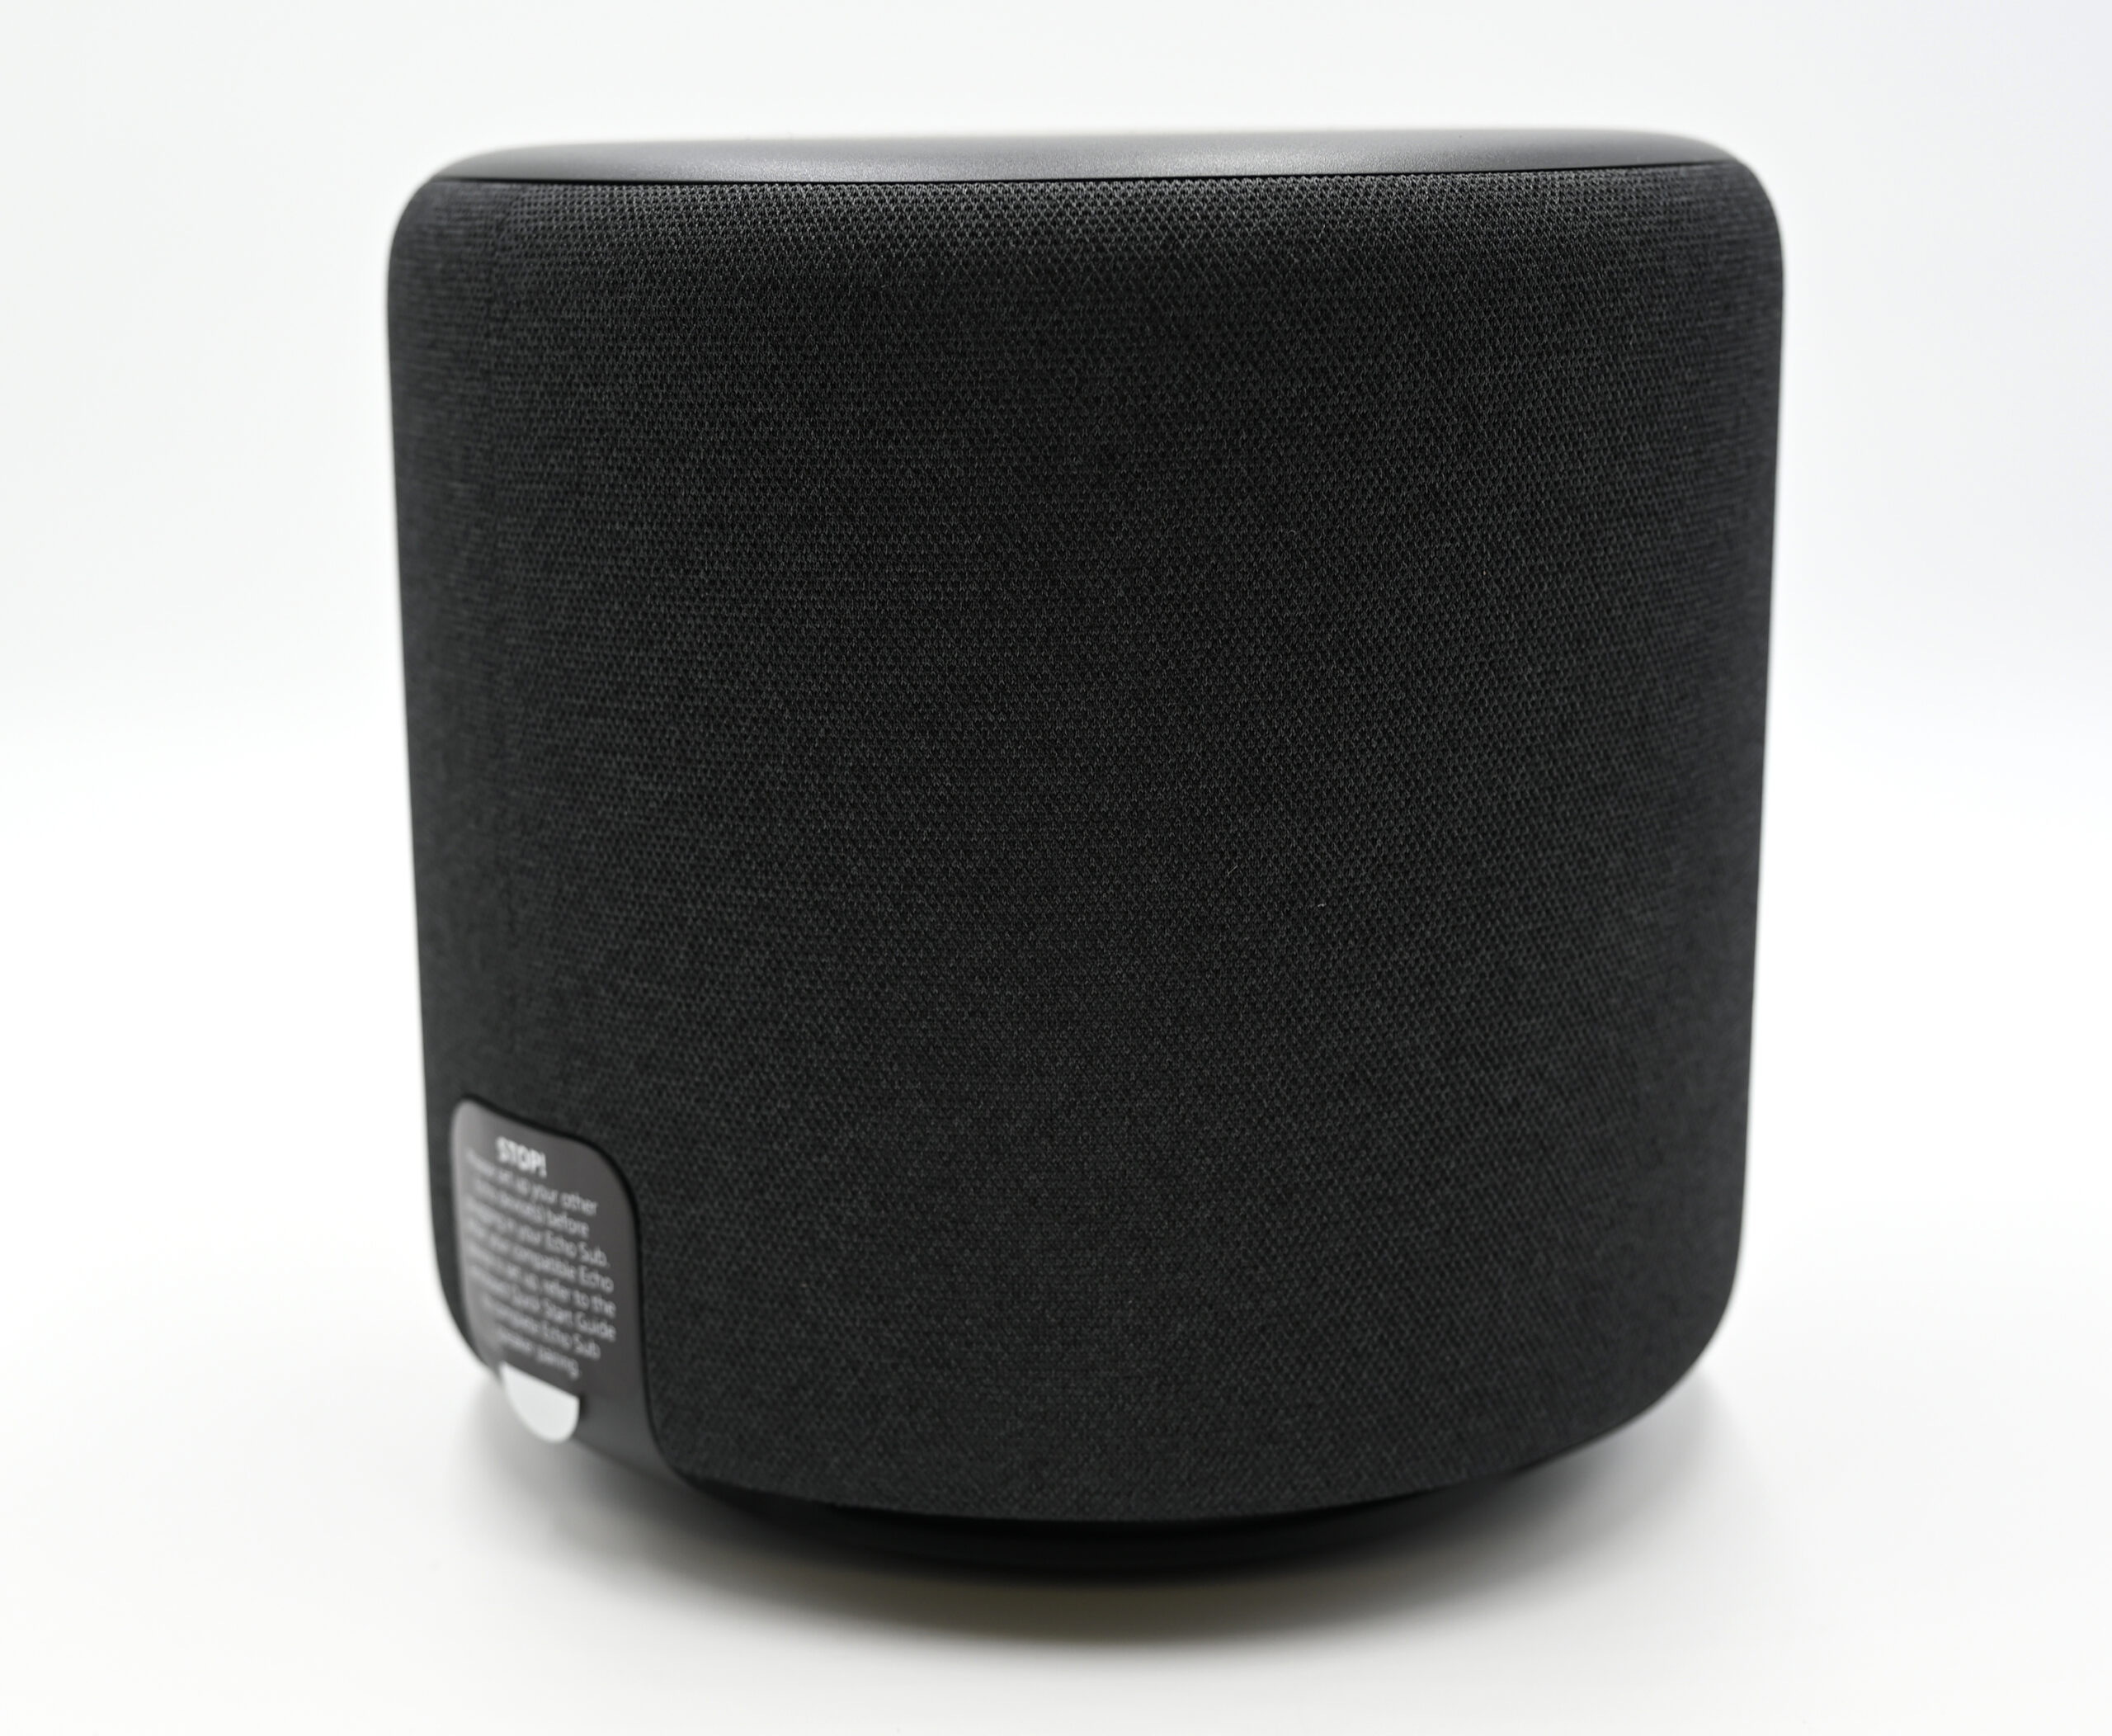 Meet Echo Sub - Powerful subwoofer for our Echo - requires